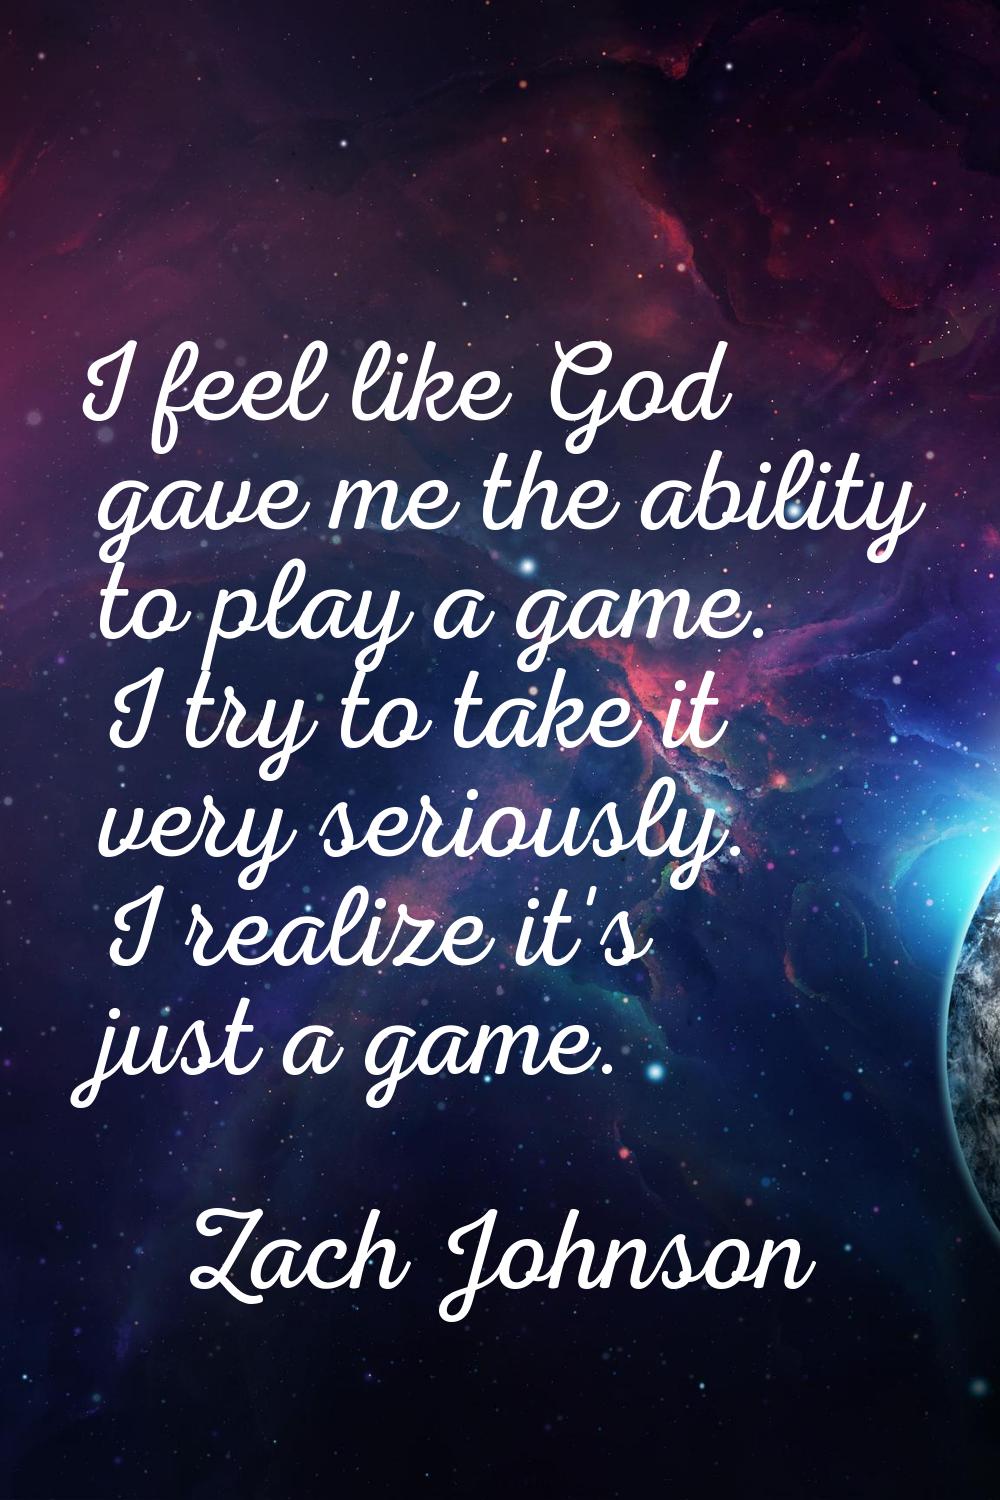 I feel like God gave me the ability to play a game. I try to take it very seriously. I realize it's